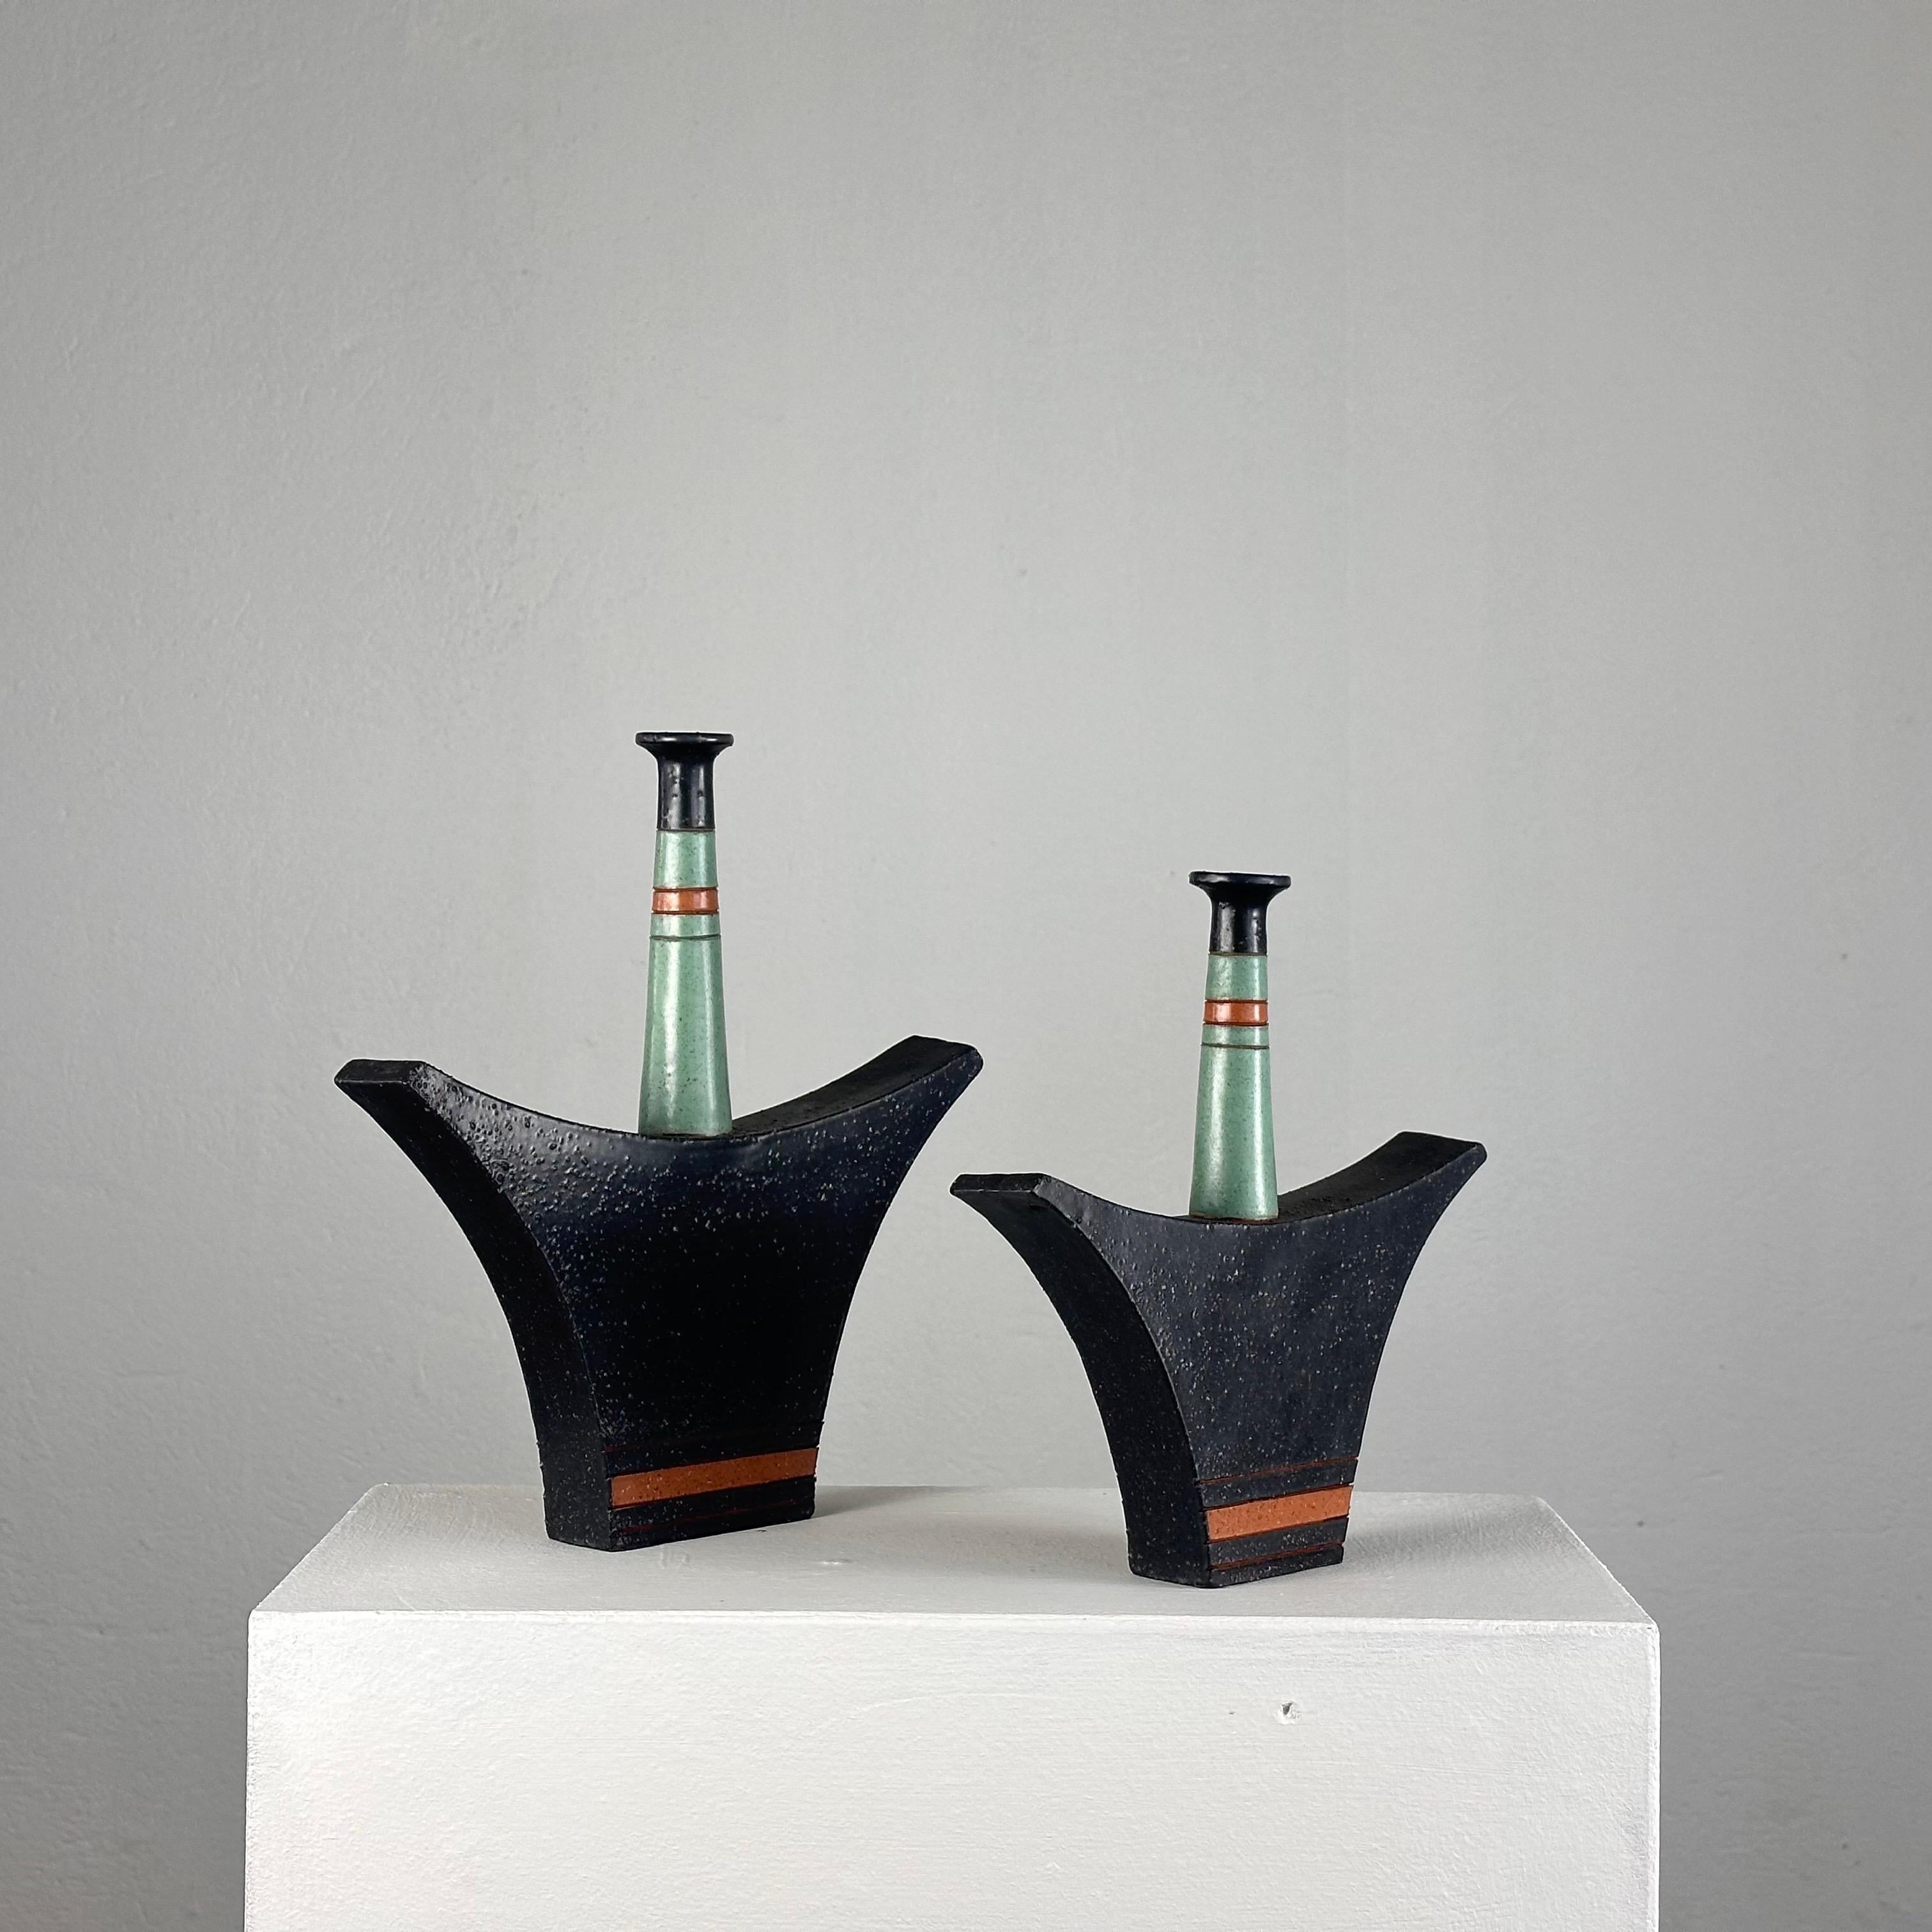 Illuminate your space with the vibrant spirit of the 1980s with this captivating pair of ceramic vases by the renowned Italian artist Vanni Donzelli. Crafted during the heyday of Memphis design, these vases epitomize the era's bold colors, geometric